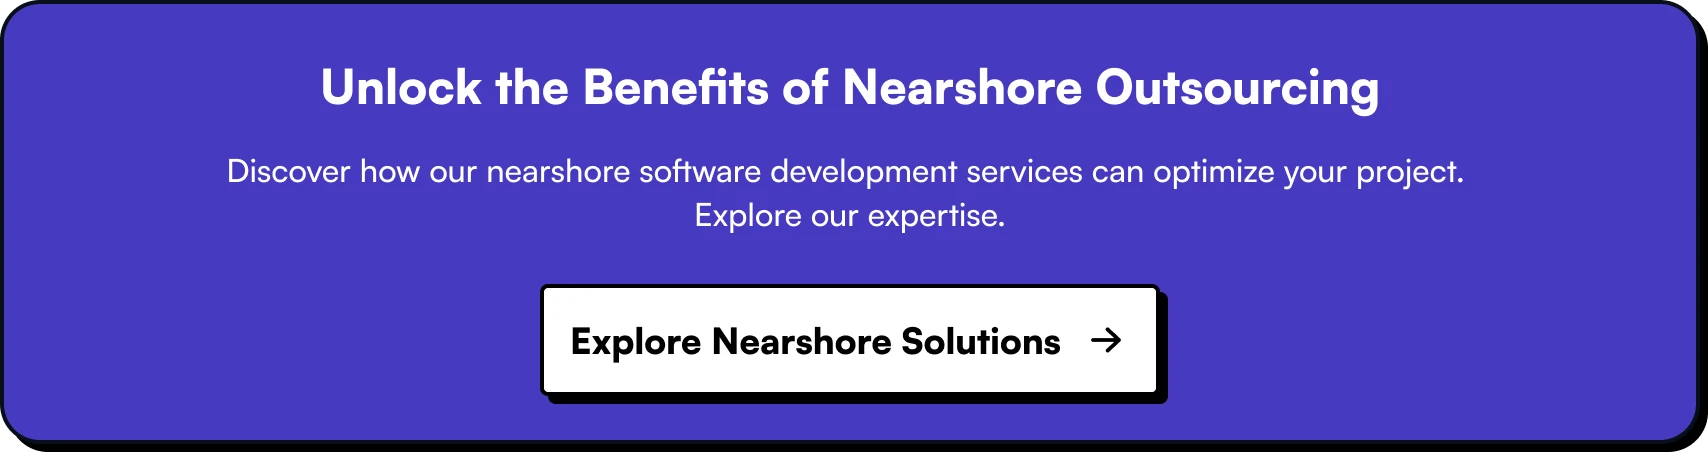 Unlock the Benefits of Nearshore Software development Outsourcing